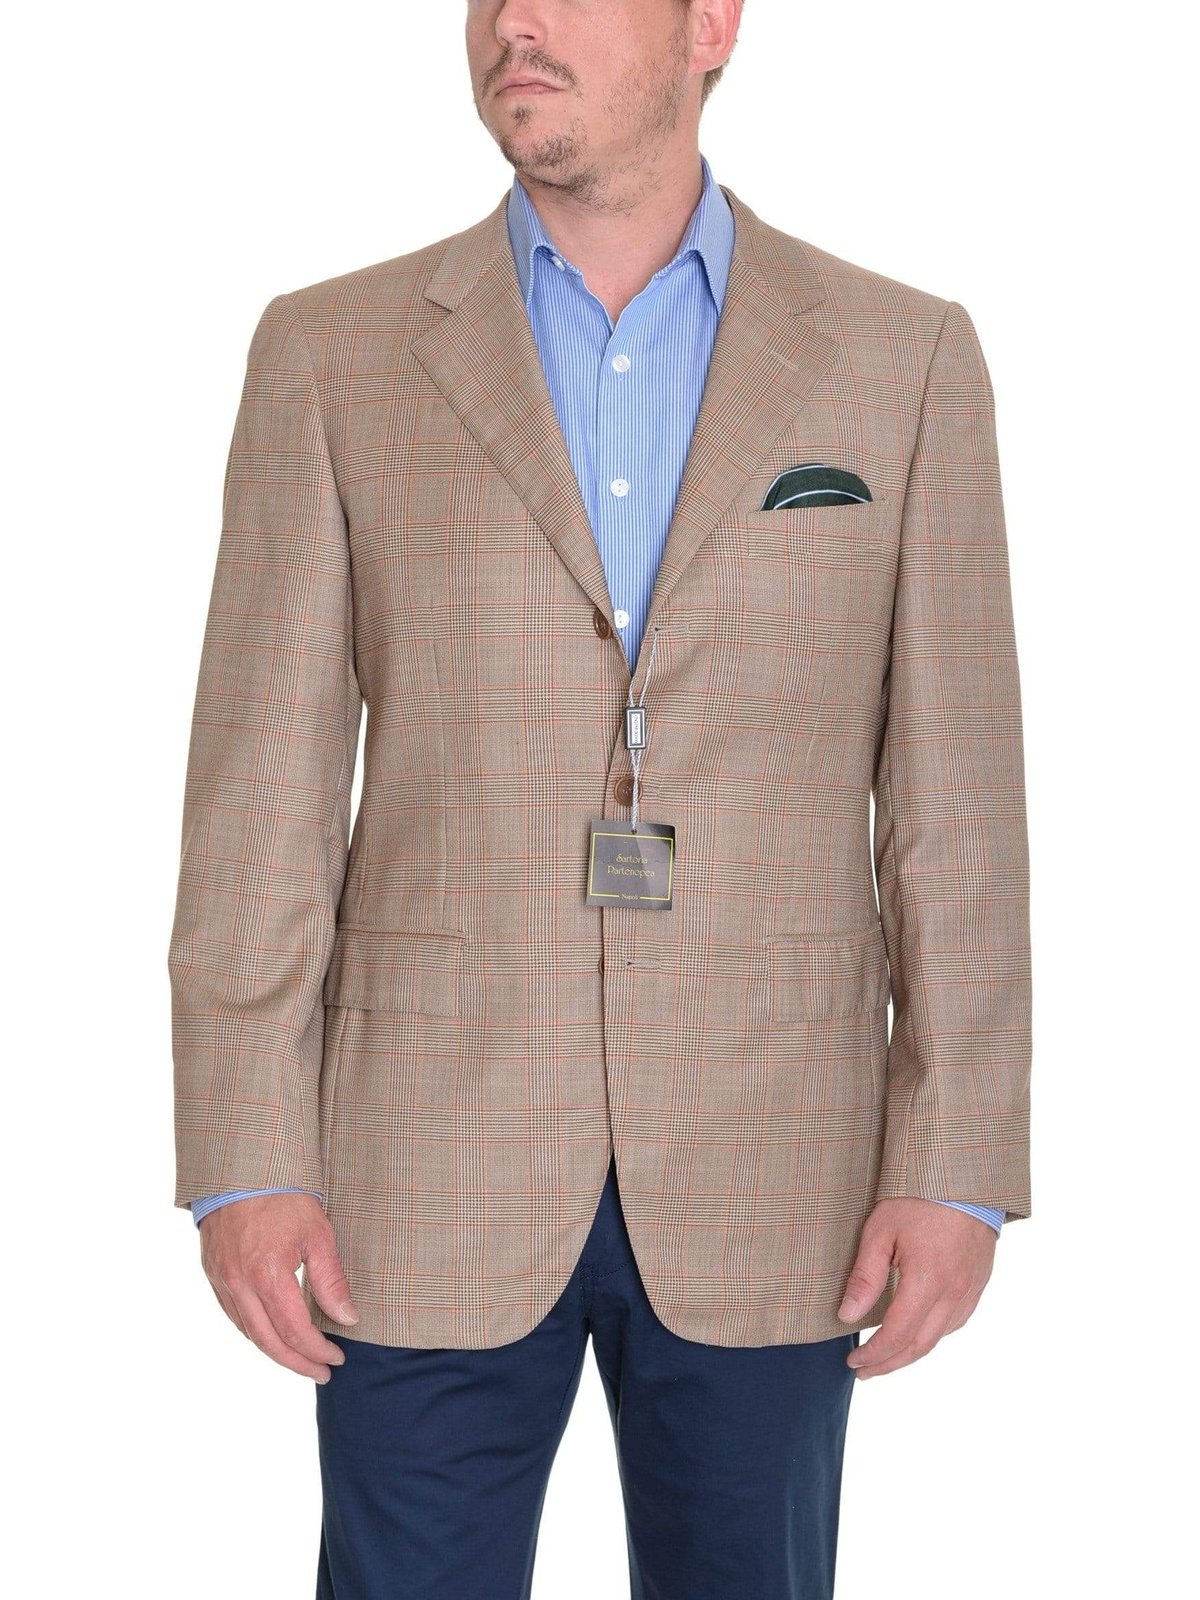 Sartoria Partenopea Italy 40R 50 Light Brown Glen Plaid Canvassed Wool Sportcoat - The Suit Depot